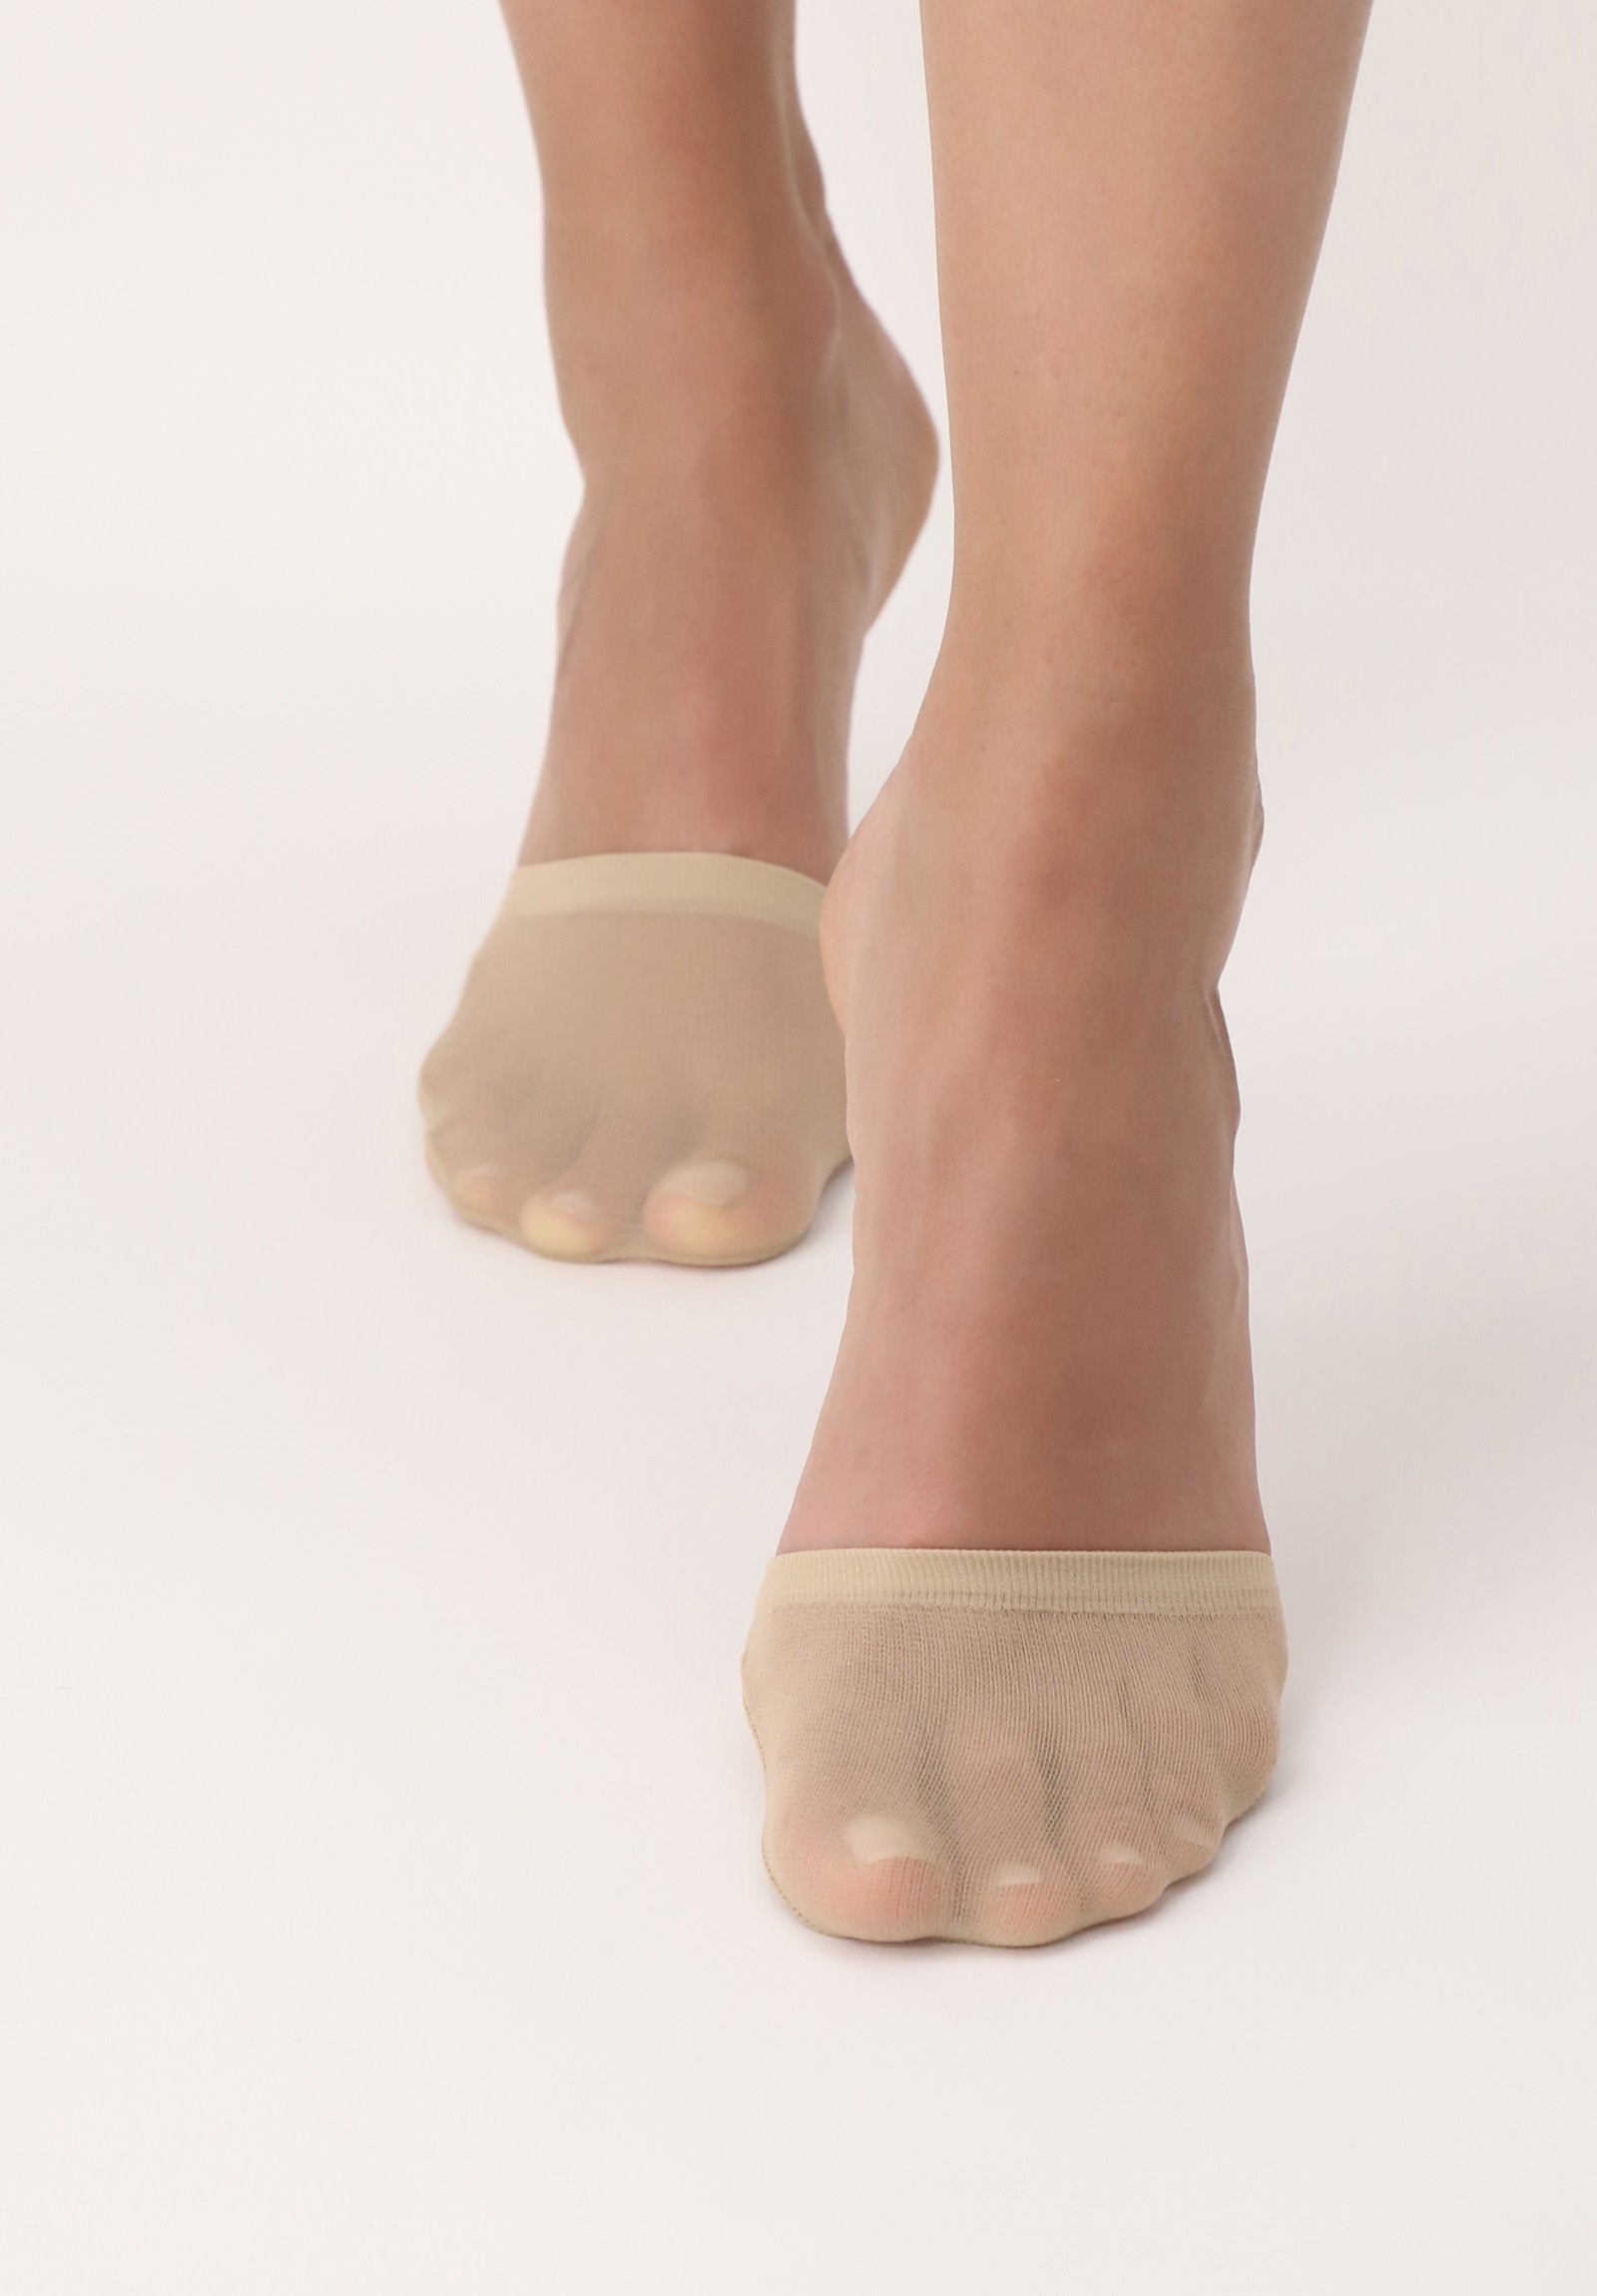 OroblÌ_ Solange Pointe - Semi sheer nude toe covers, perfect for wearing in open back shoes such as mules and sling-backs and also to wear under your favourite hosiery to help protect the toes.